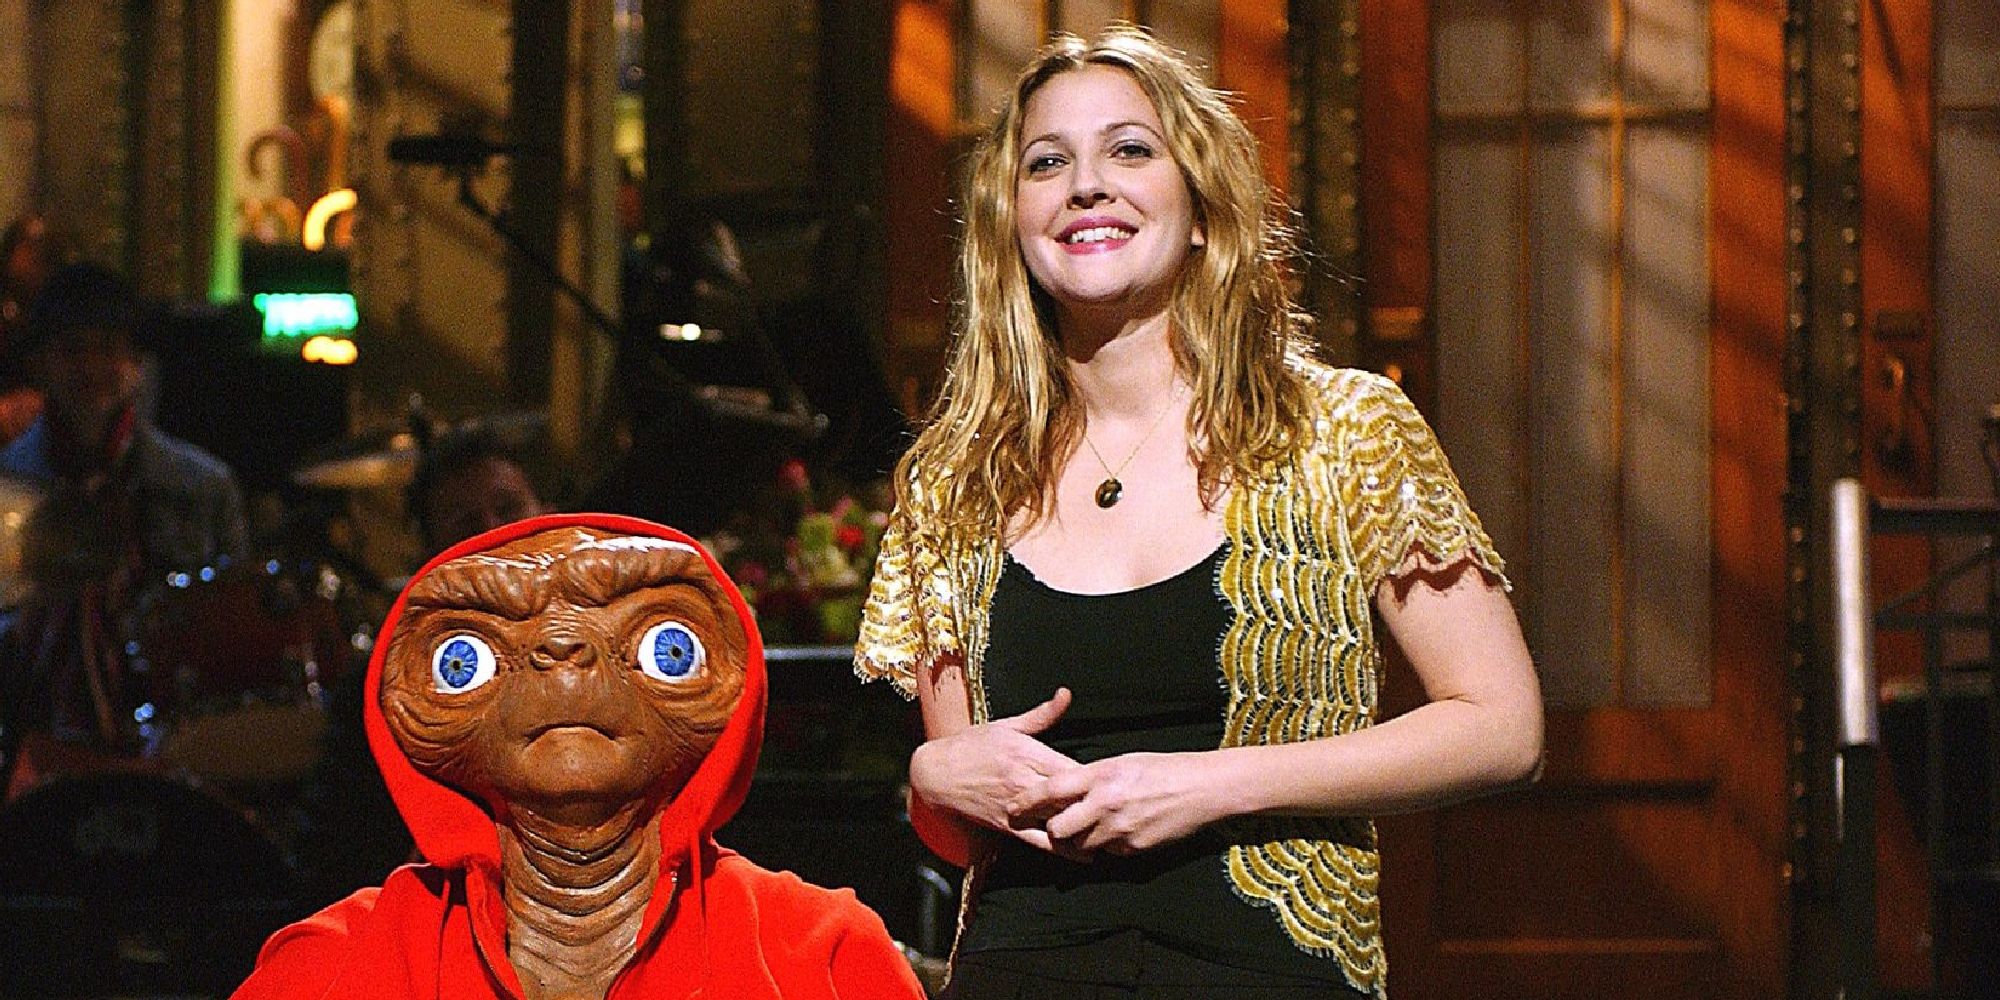 Drew Barrymore appearing with E.T. in her monologue